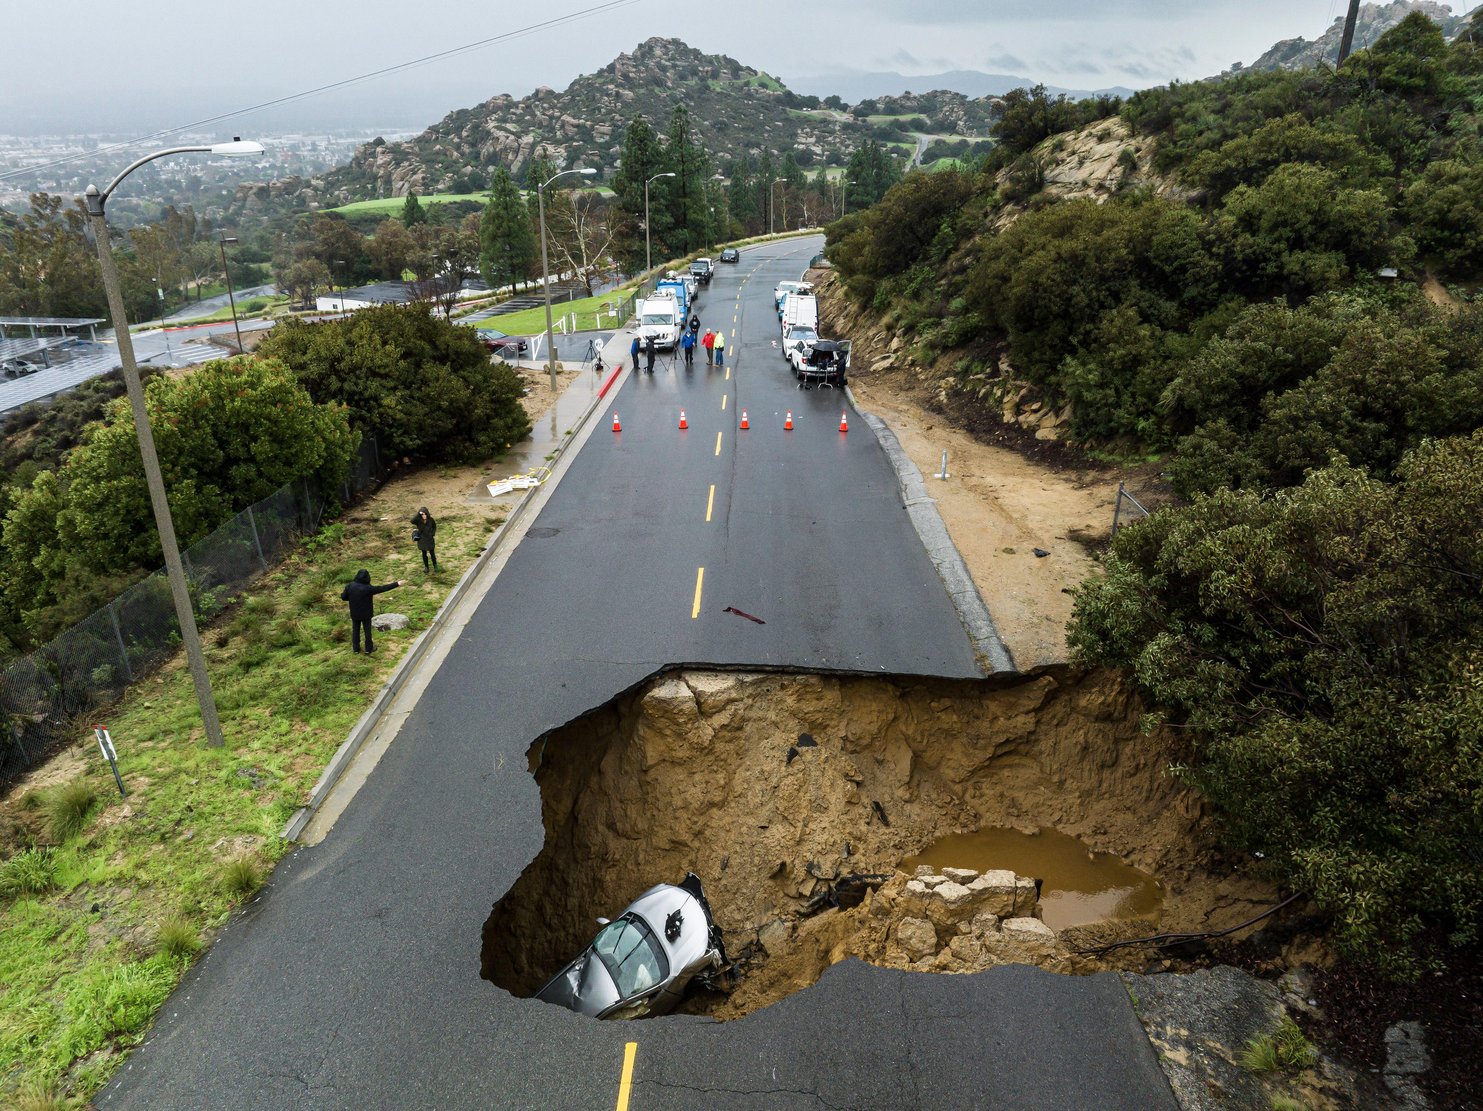 After an atmospheric river brought heavy rains in January 2023, a large sinkhole opened up on a road in the Chatsworth area of Los Angeles. (Photo by Ted Soqui / SIPA USA / Alamy) 